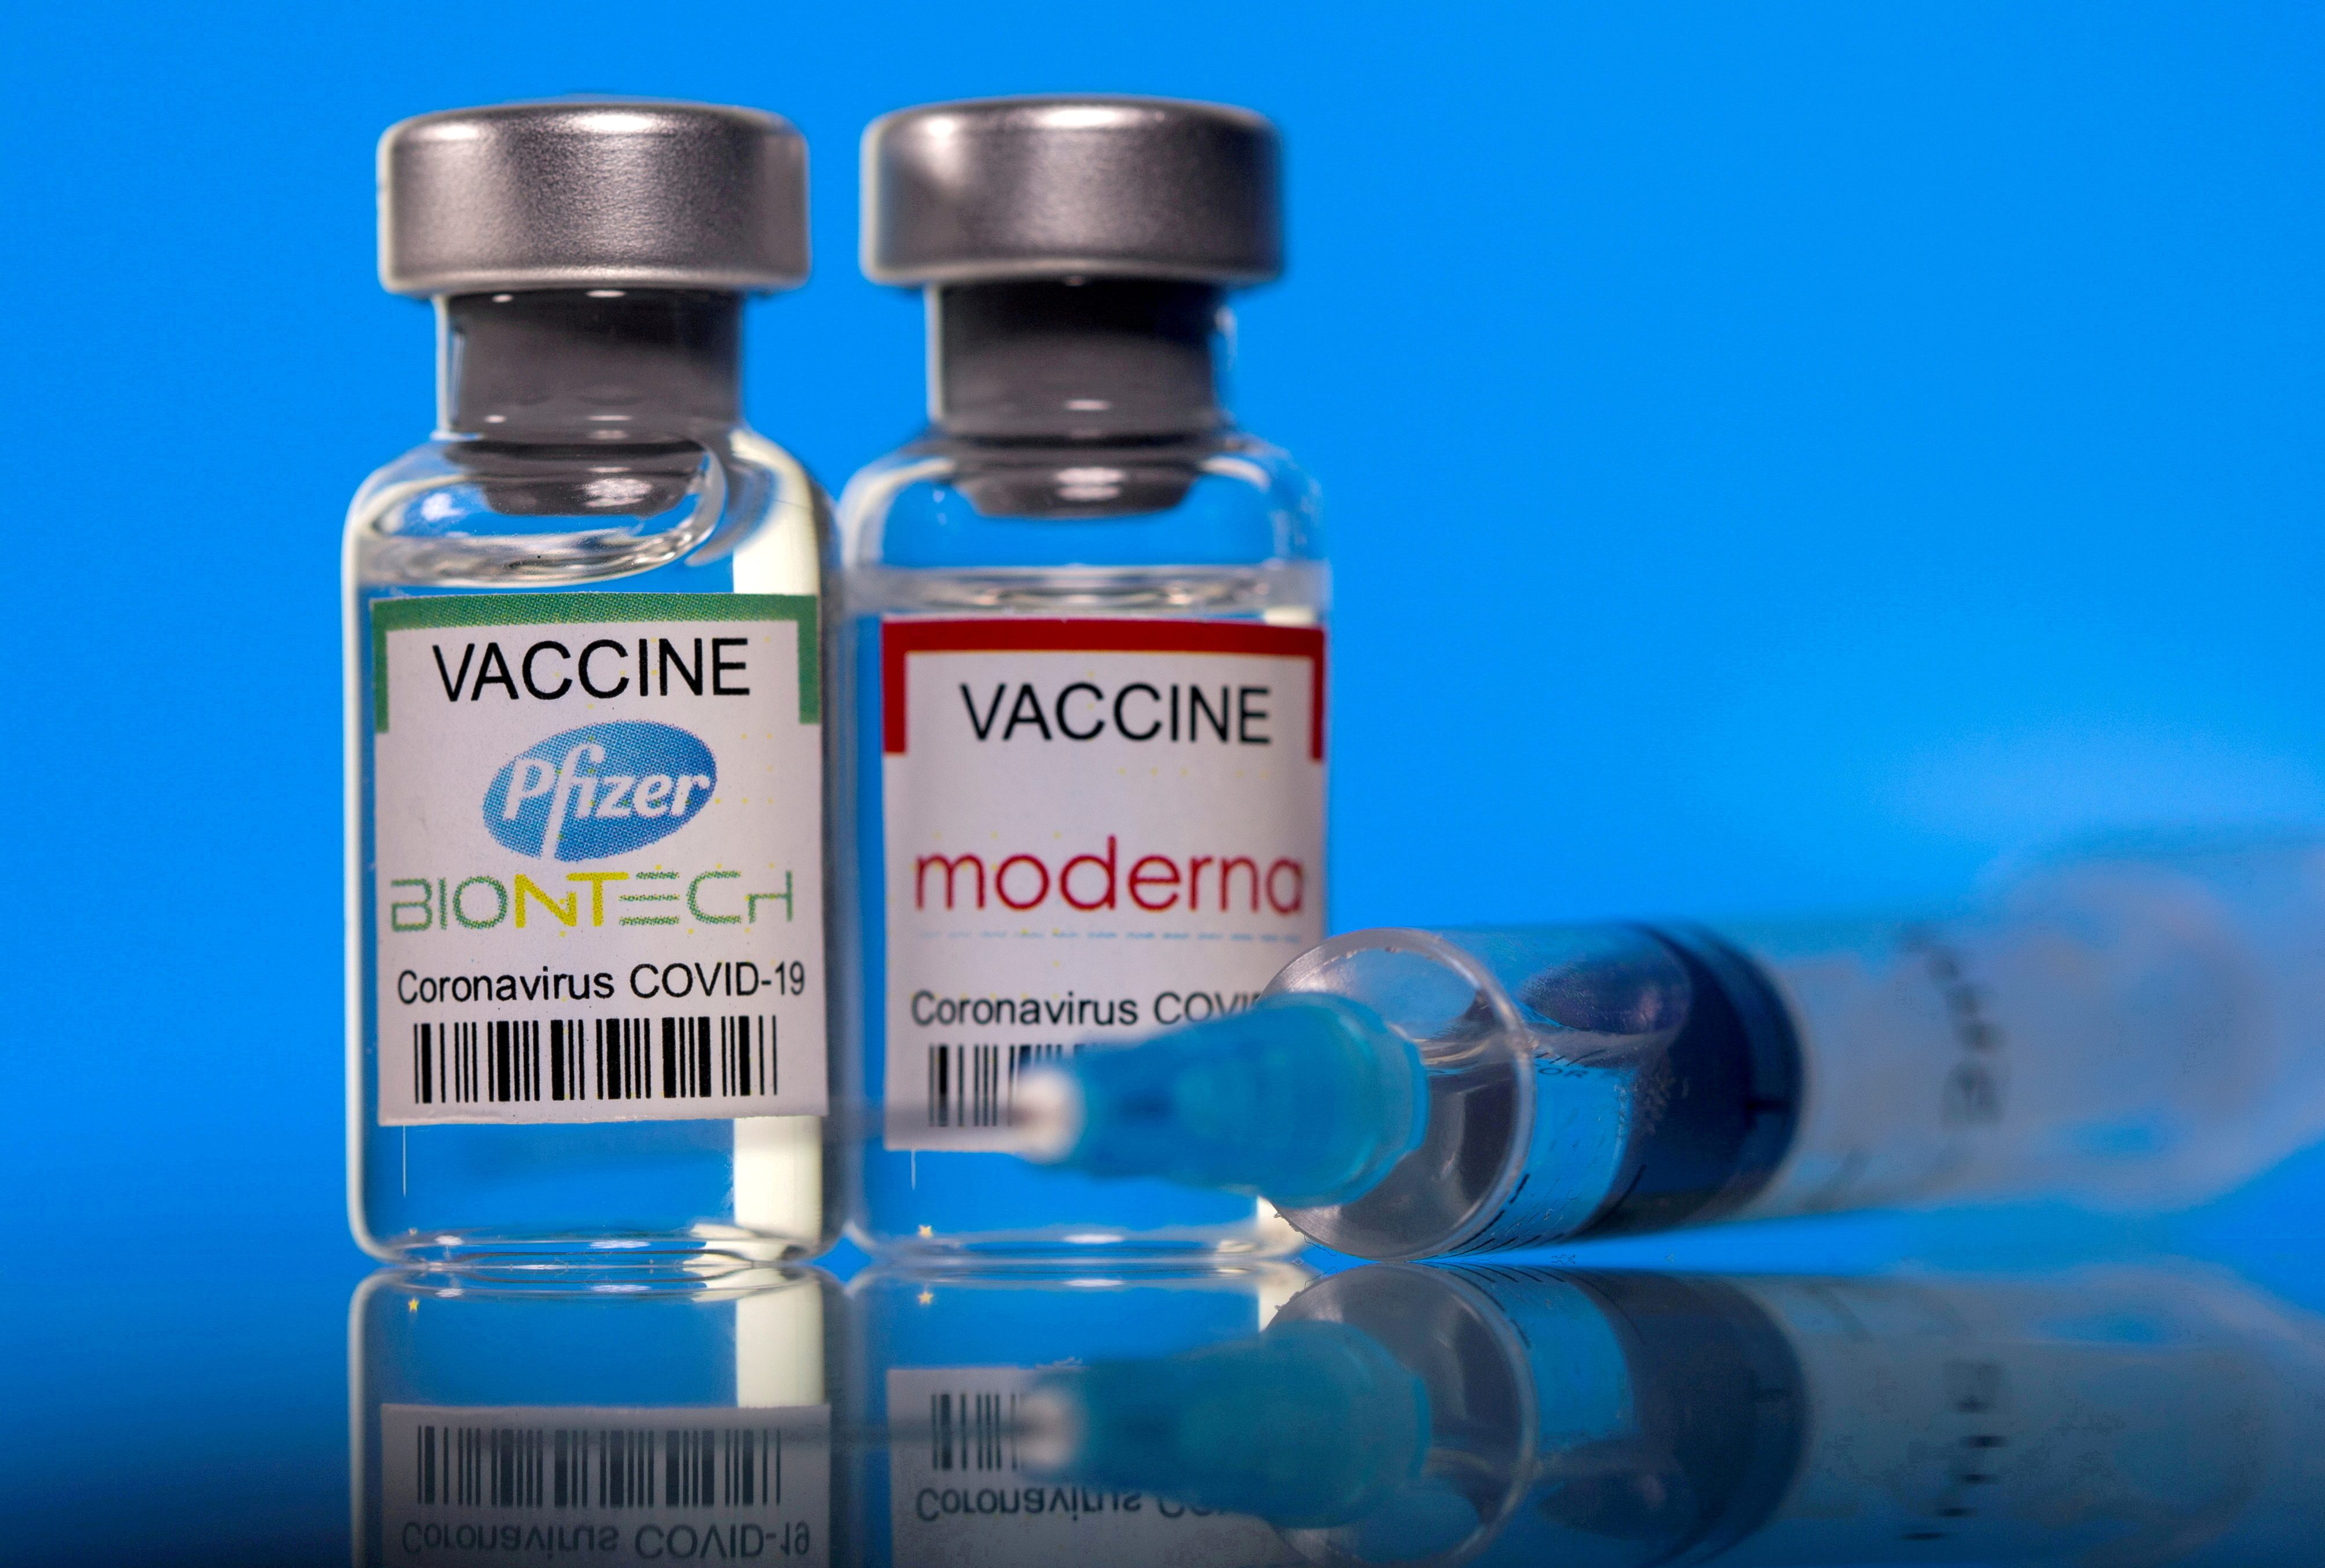 Pfizer on track for US vaccine boosters, Moderna lagging, says Fauci